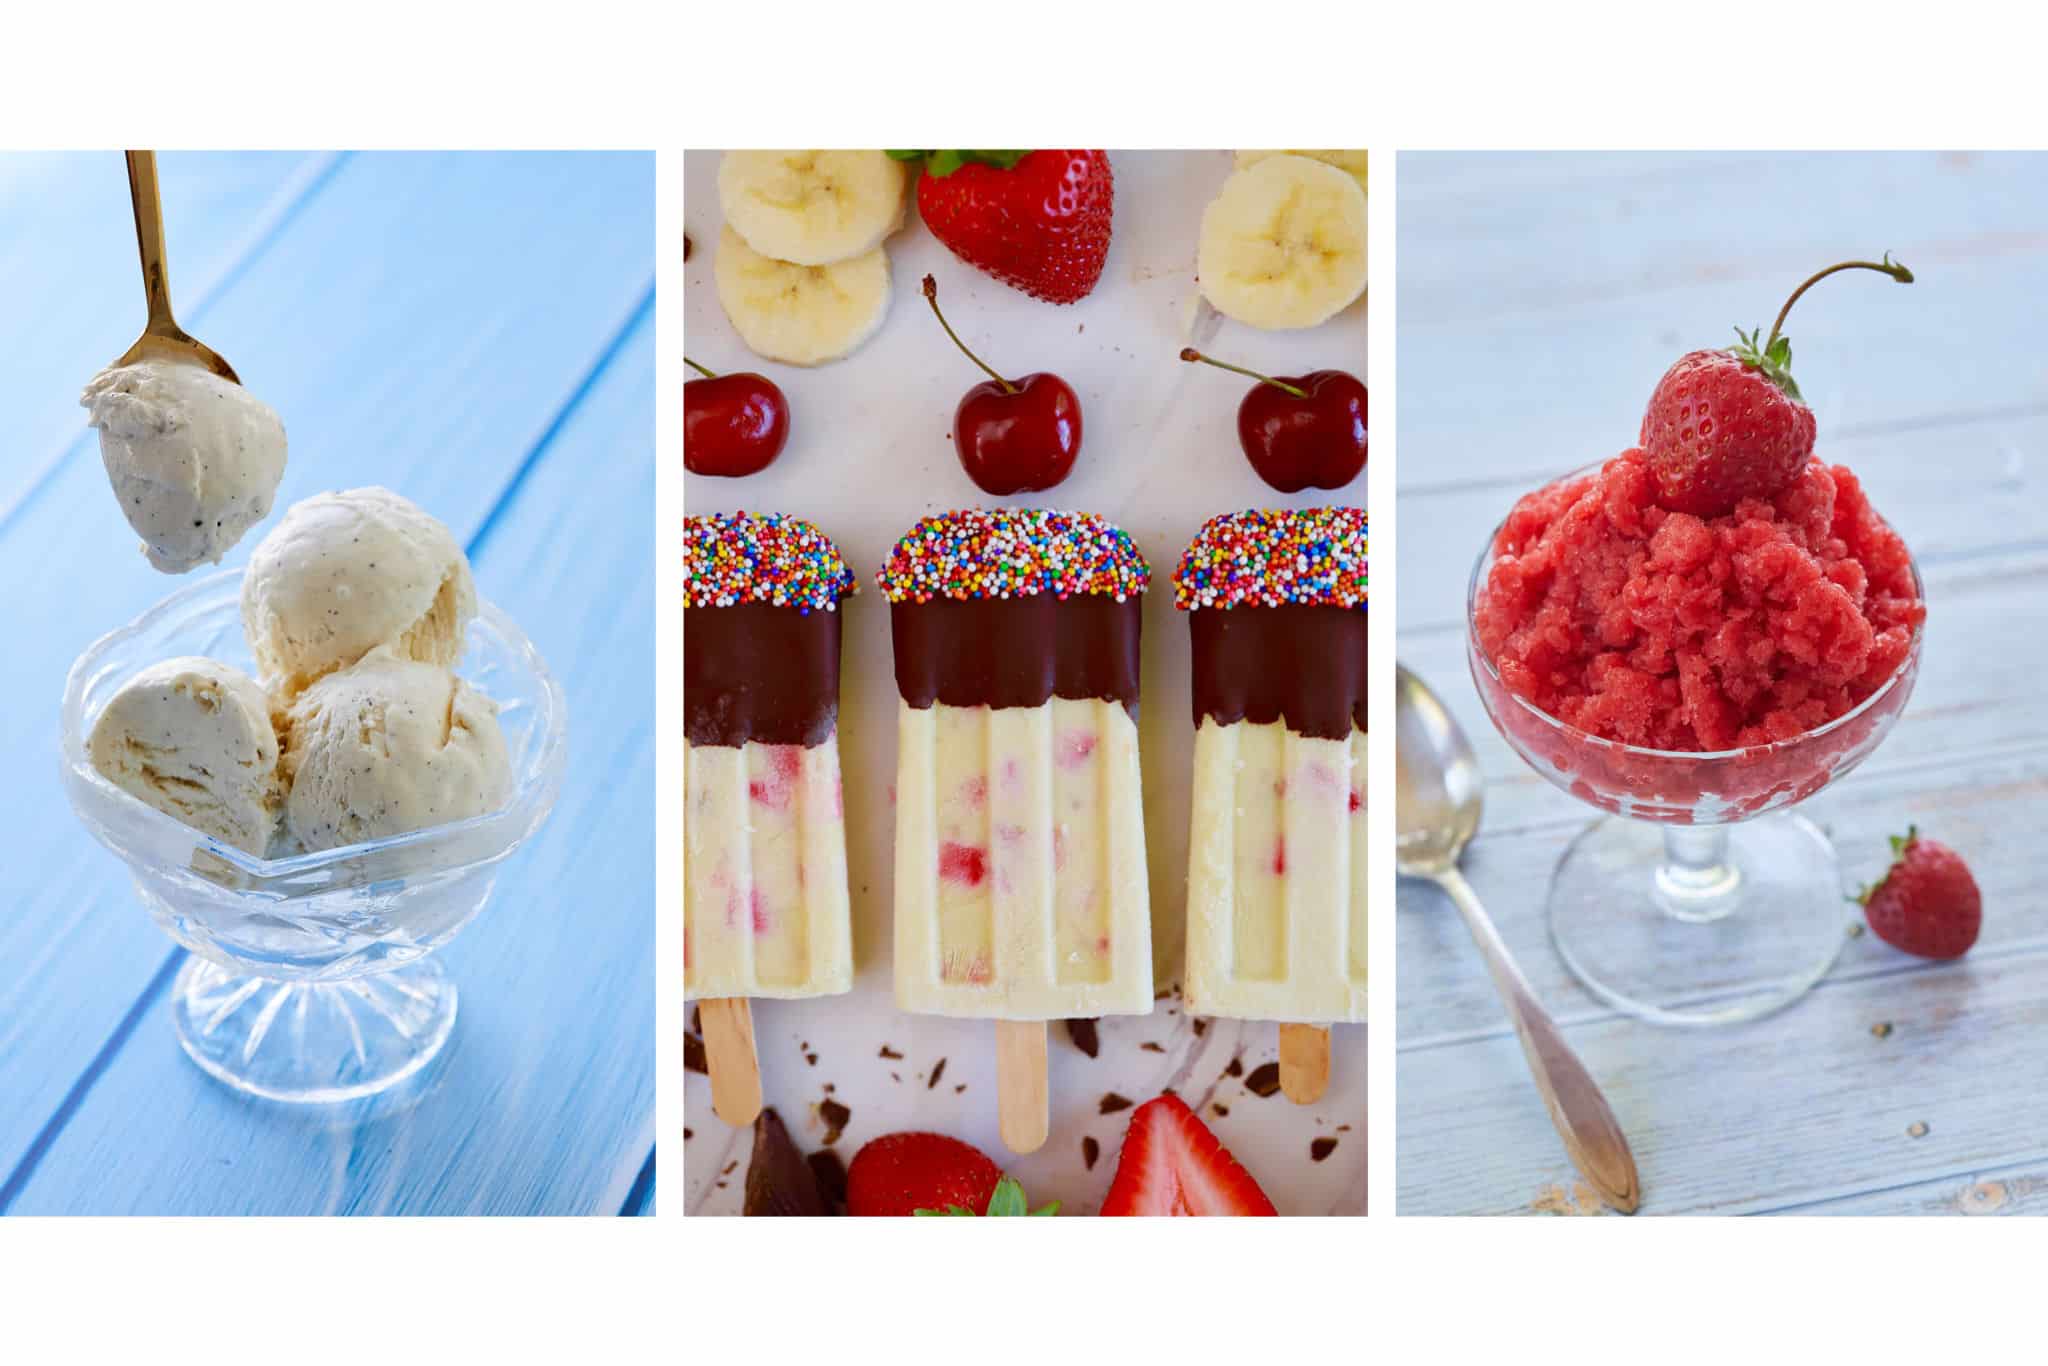 3 of the best frozen summer desserts side-by-side, including ice cream, popsicles, and granitas.